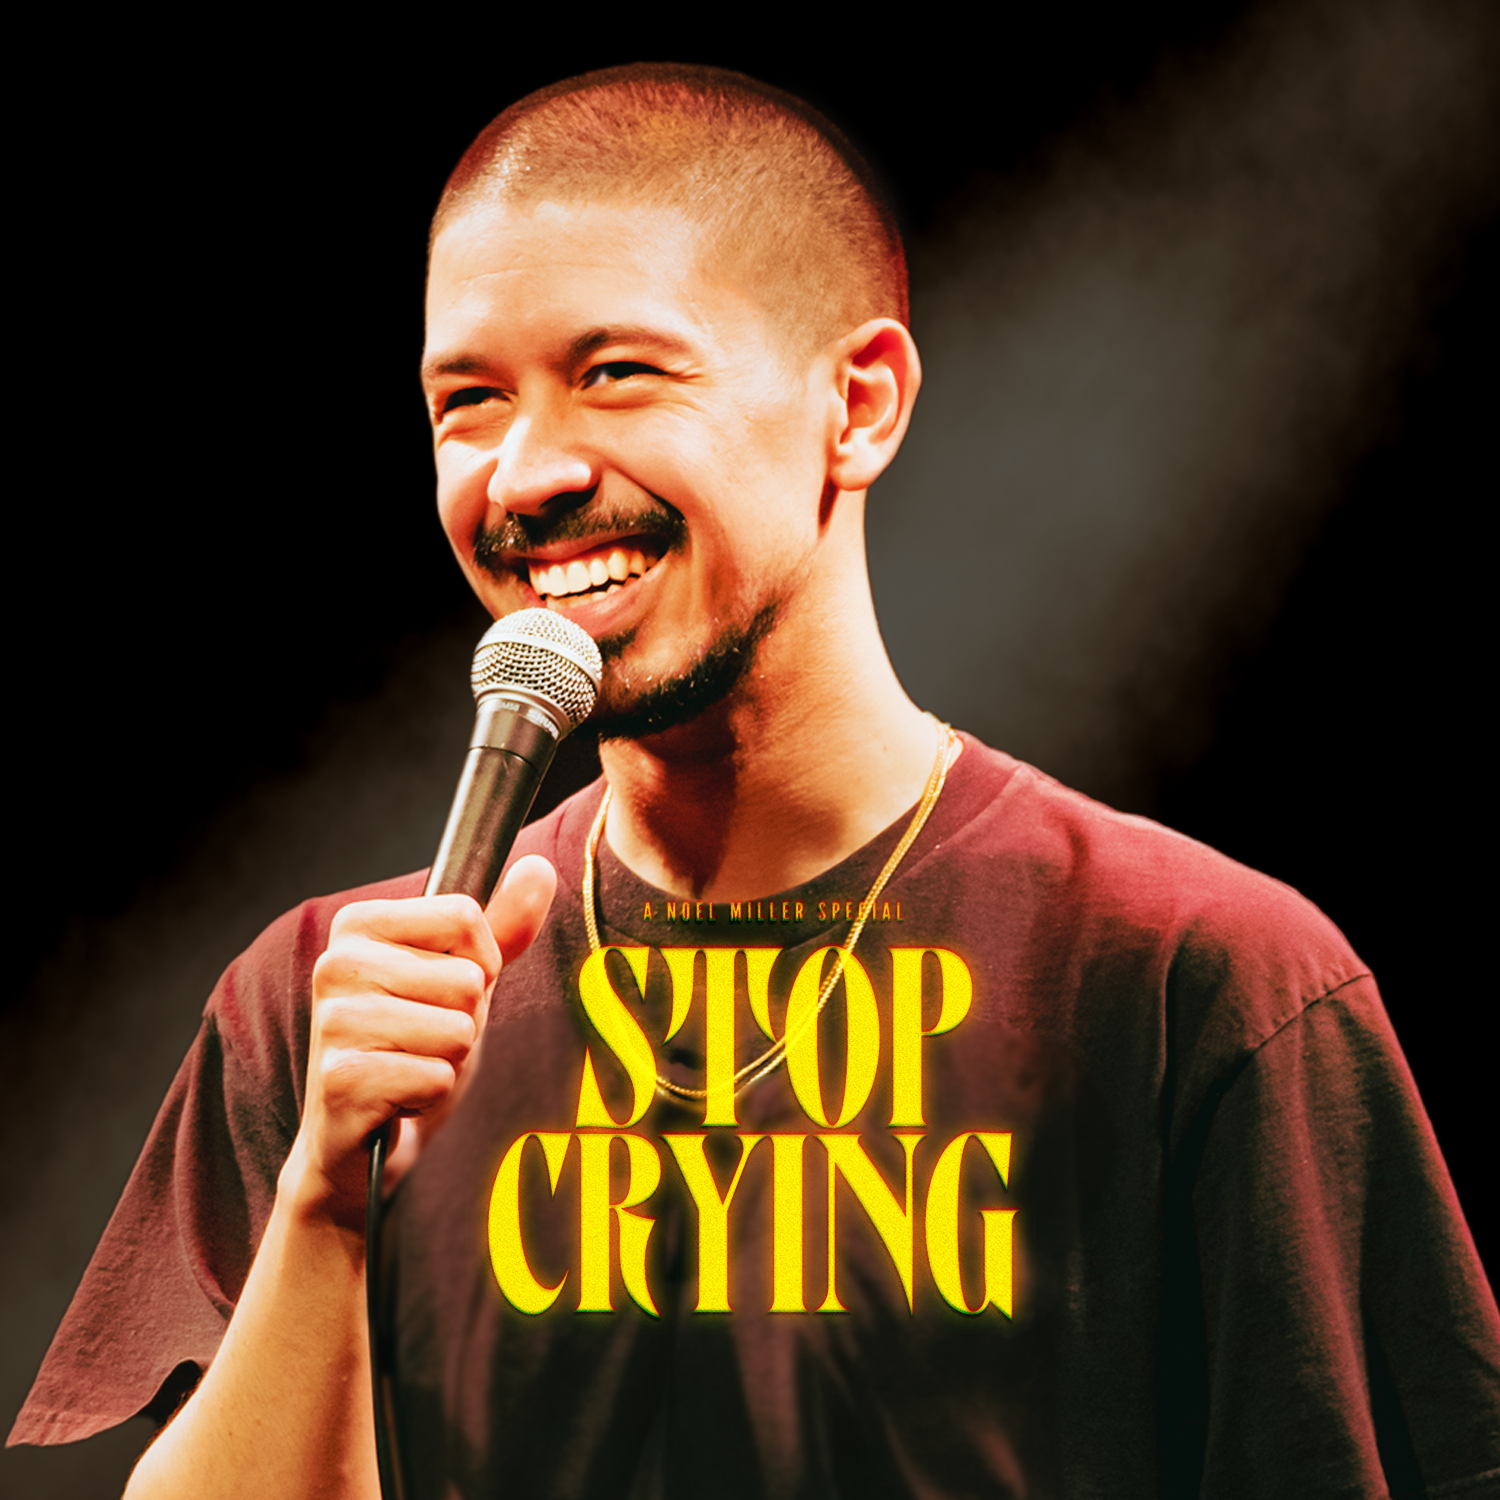 stop-crying-special-noel miller las vegcas stand up comedy show tickets